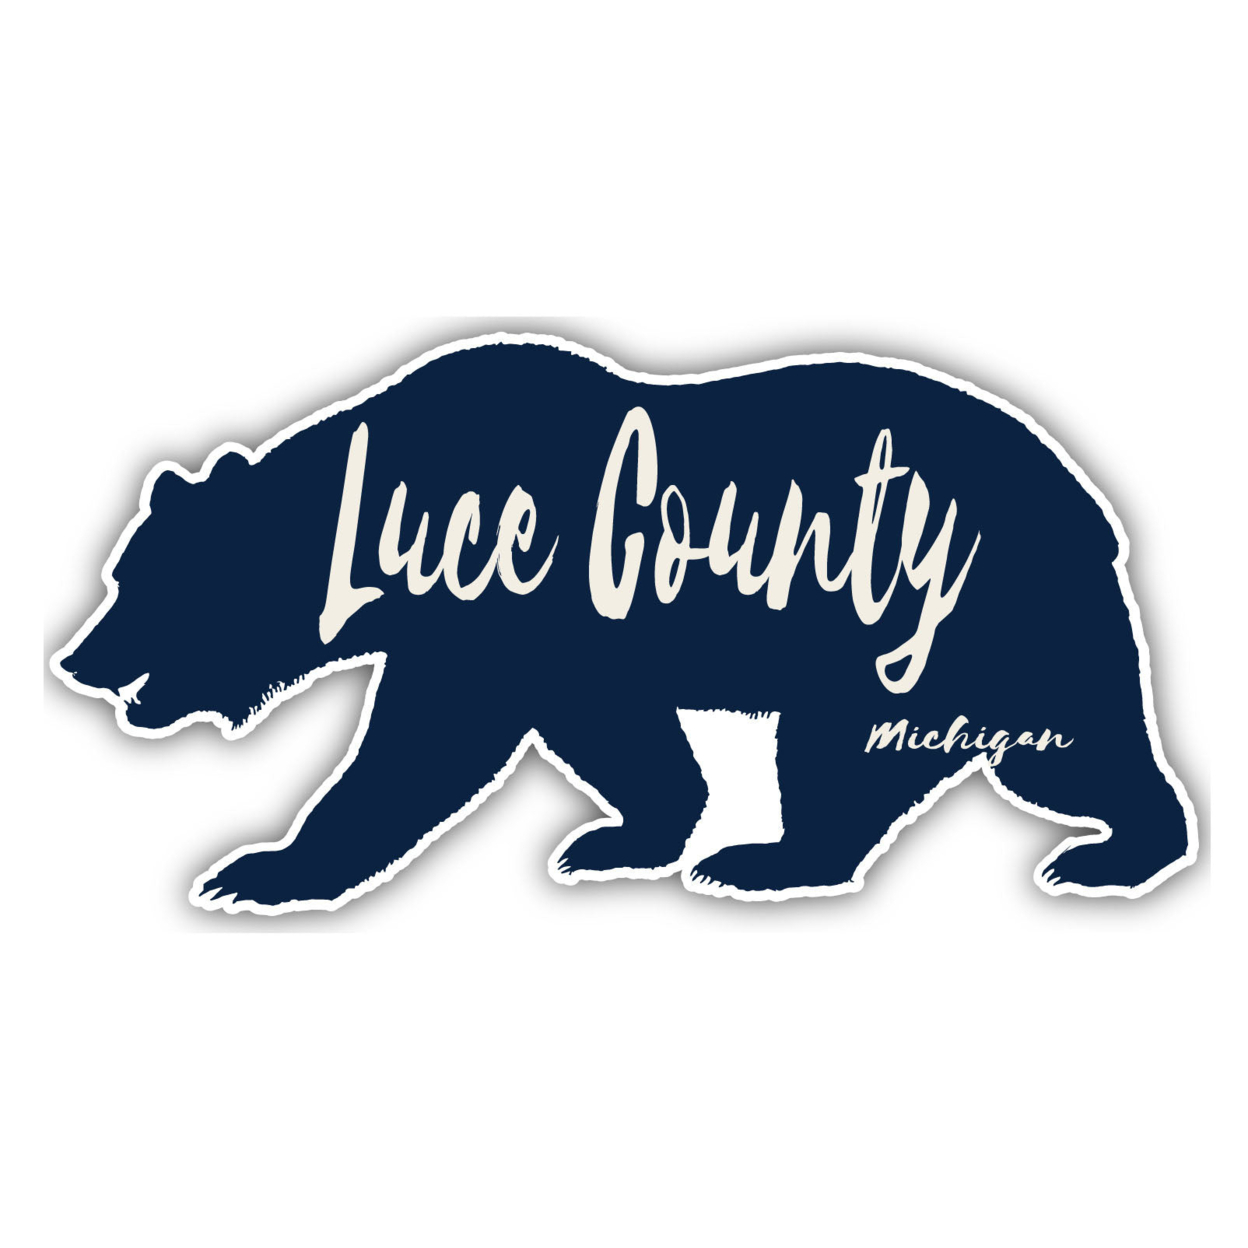 Luce County Michigan Souvenir Decorative Stickers (Choose Theme And Size) - 4-Inch, Bear